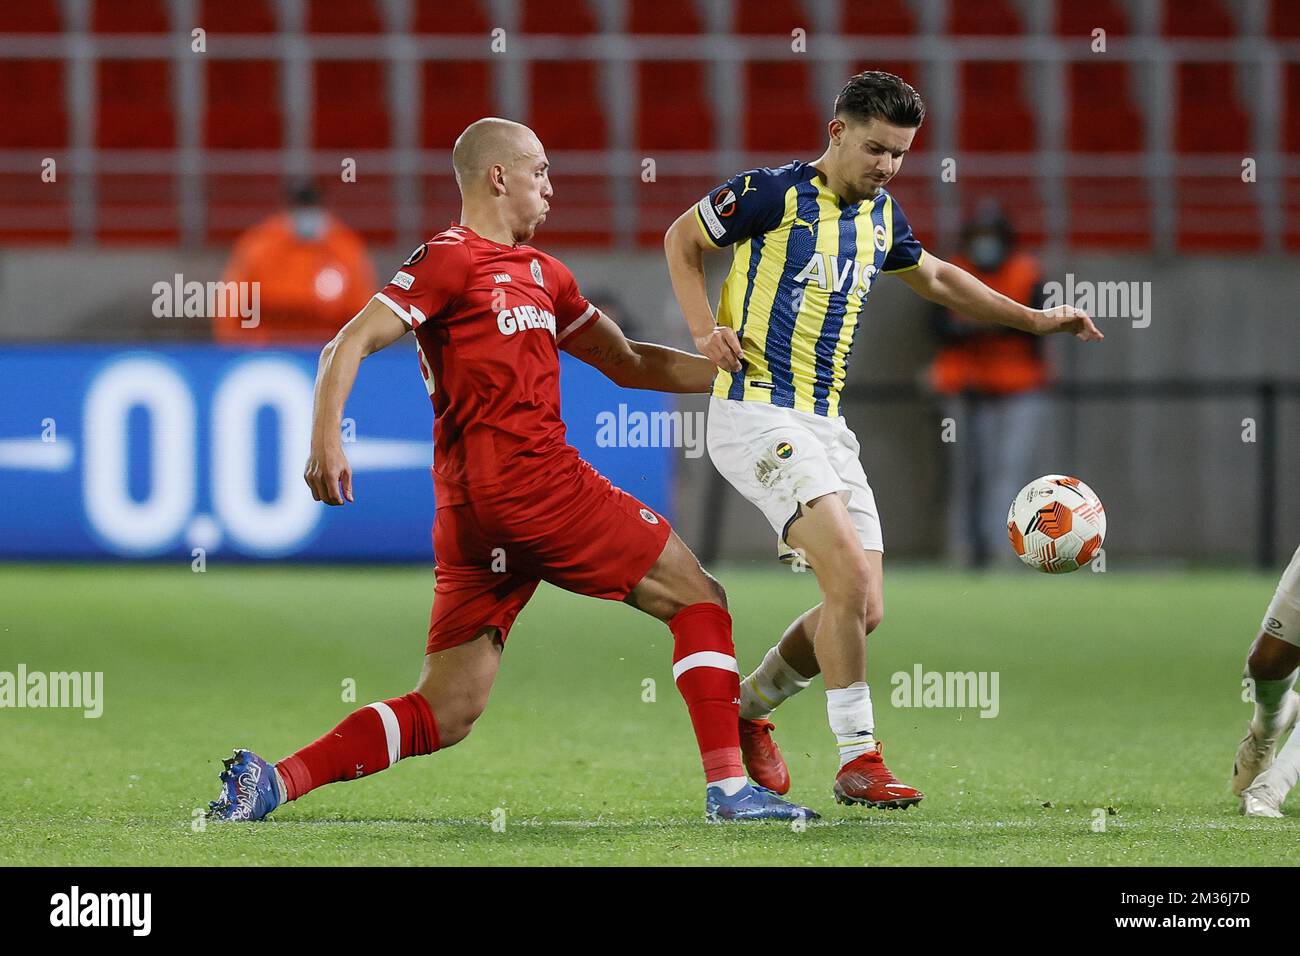 Antwerp's Michael Frey and Fenerbahce Ferdi Kadioglu fight for the ball during a soccer game between Belgian Royal Antwerp FC and Turkish club Fenerbahce S.K., Thursday 04 November 2021 in Antwerp, on the fourth day of the UEFA Europa League group stage, in group D. BELGA PHOTO BRUNO FAHY Stock Photo